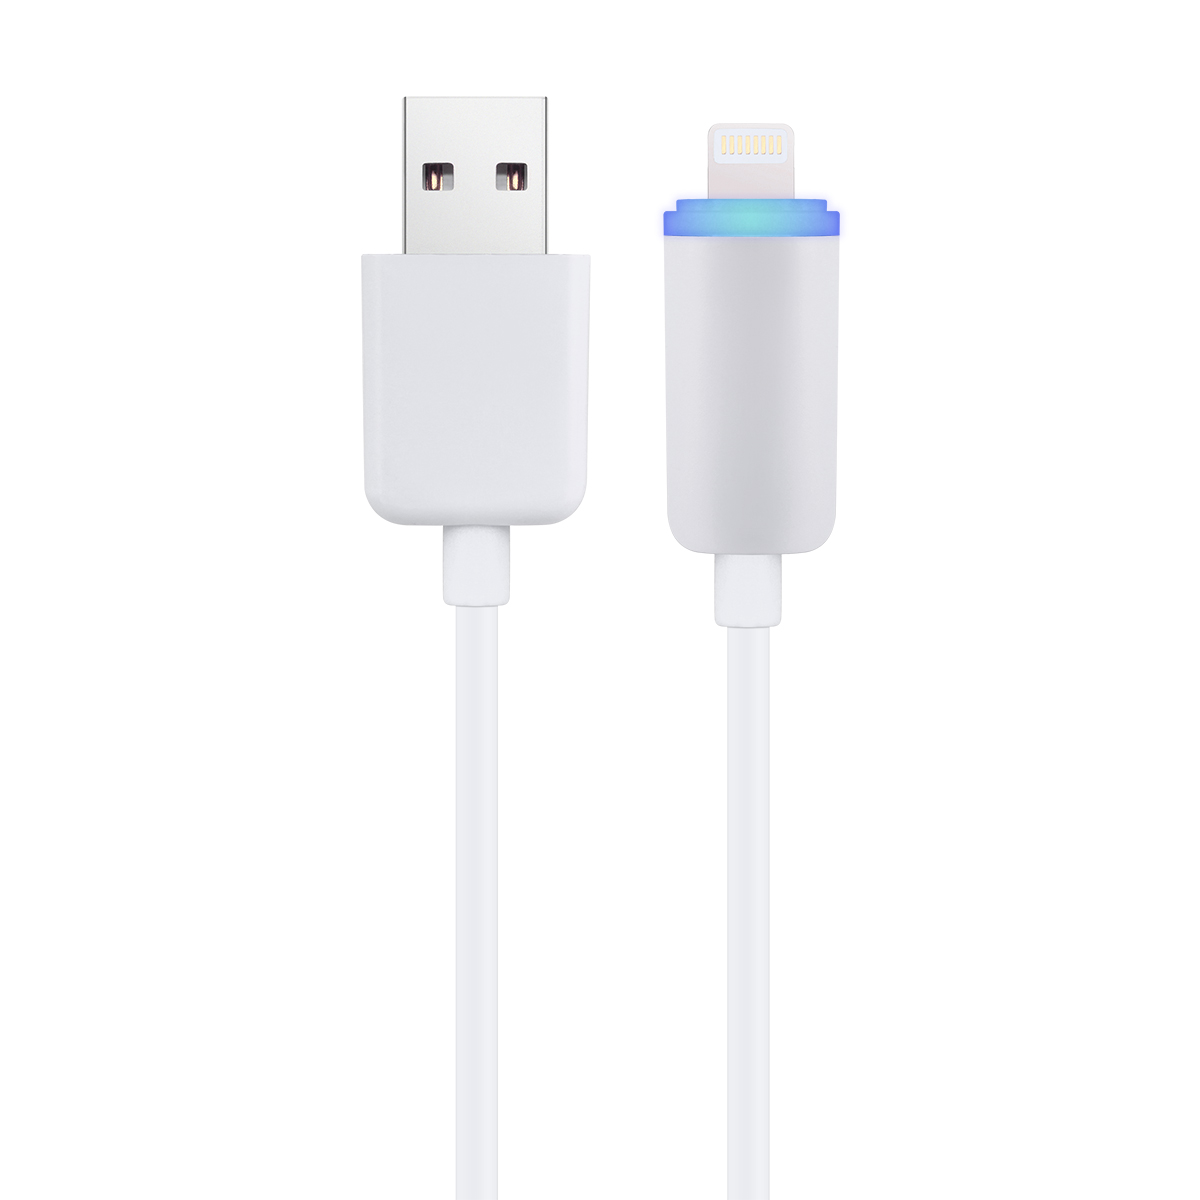 LED 8 pin Data Sync Micro USB Charger Cable for iPhone 7 - White